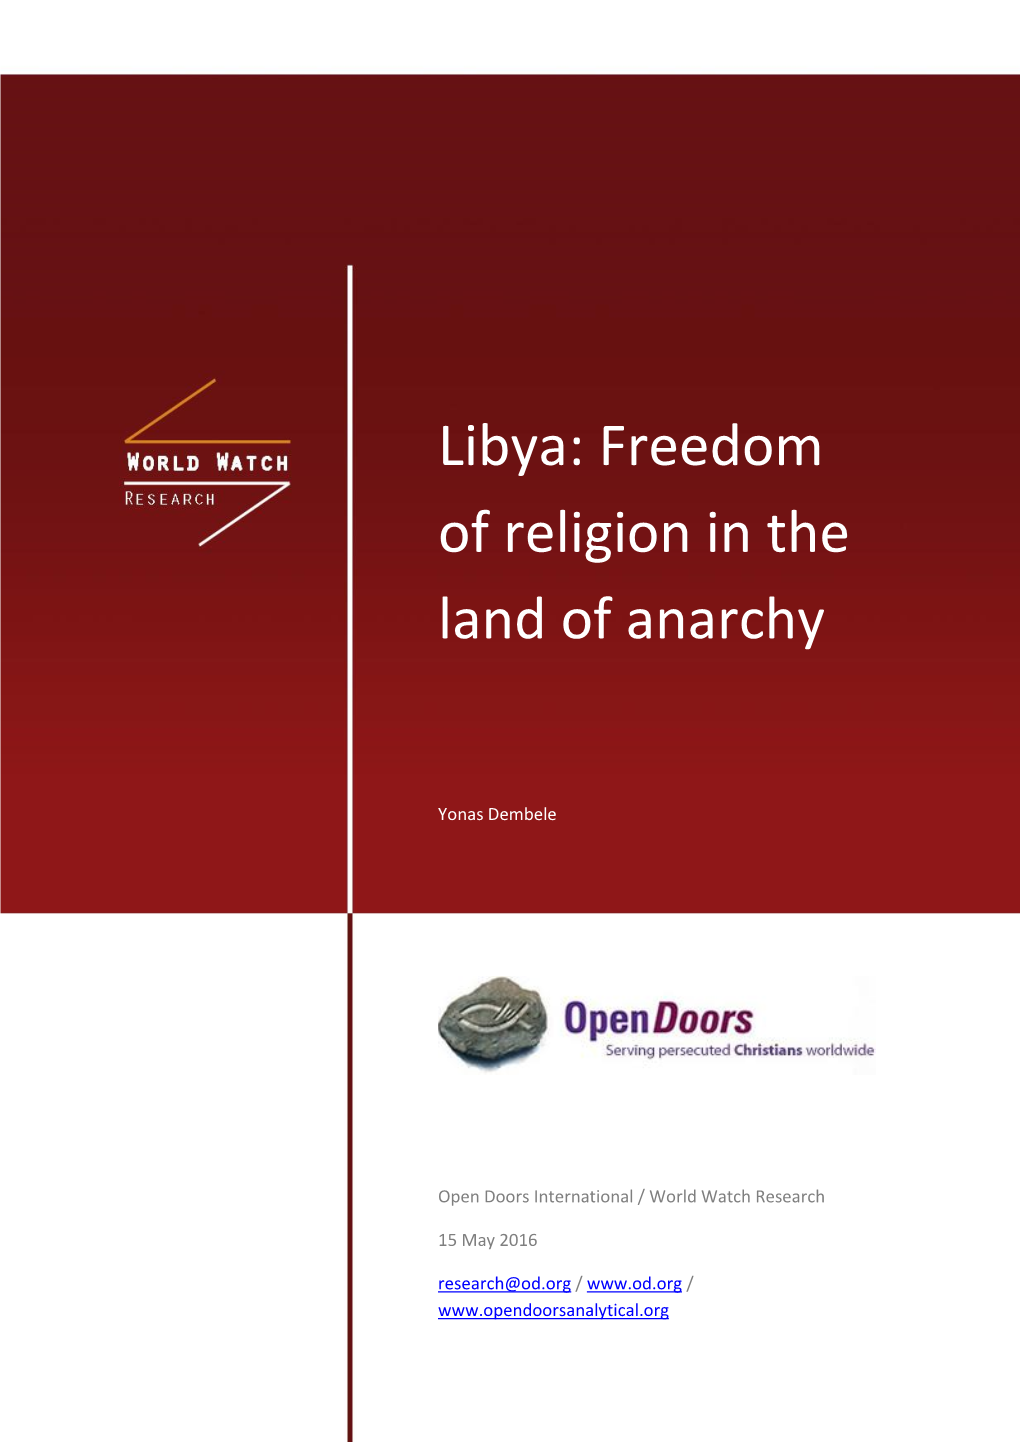 Libya: Freedom of Religion in the Land of Anarchy